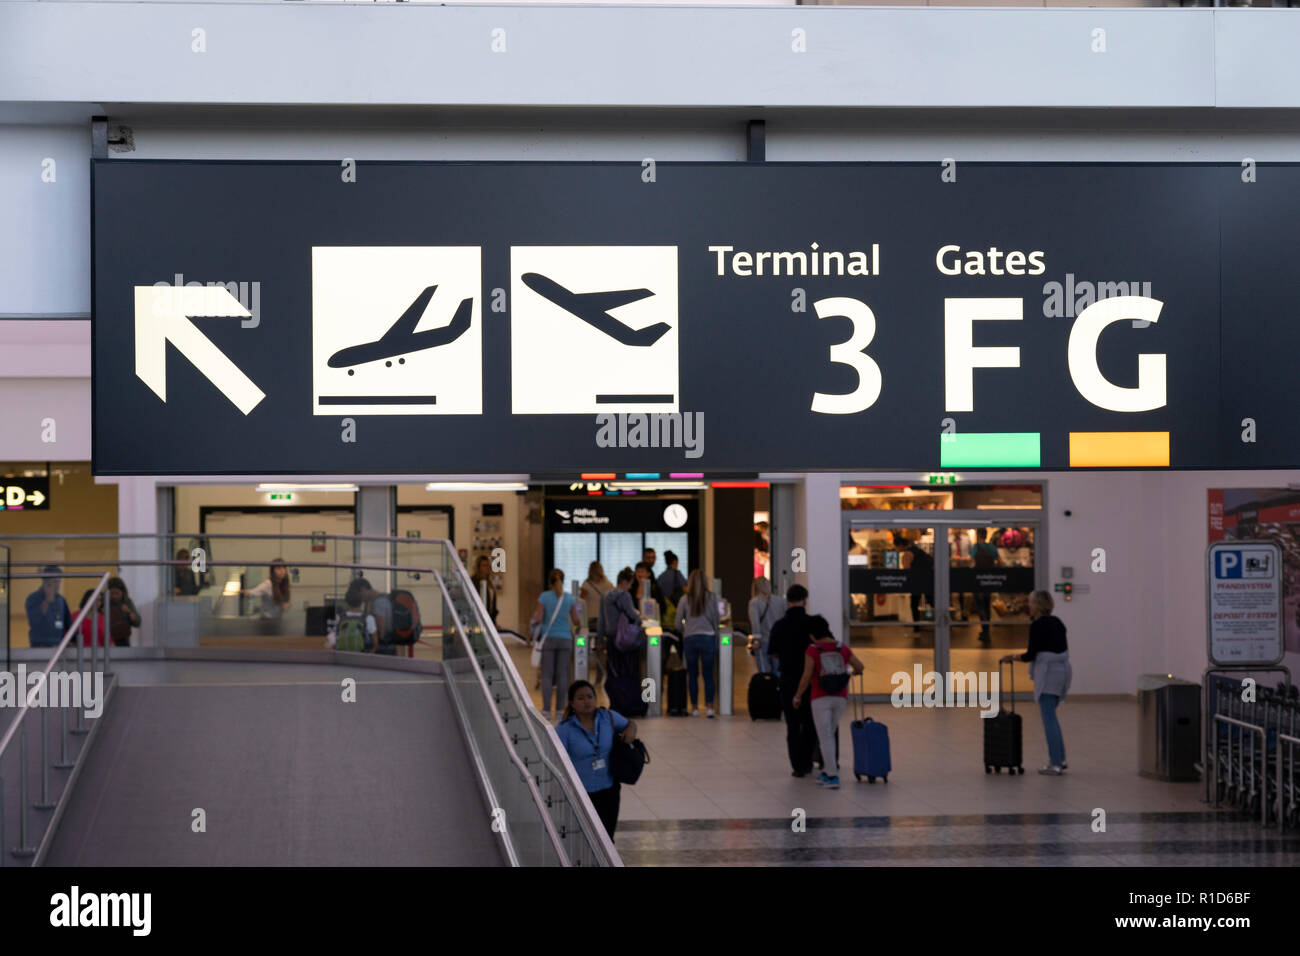 An illuminated sign at Vienna International Airport showing directions for arrivals, departures and gates, Passengers with suitcases. Austria Stock Photo